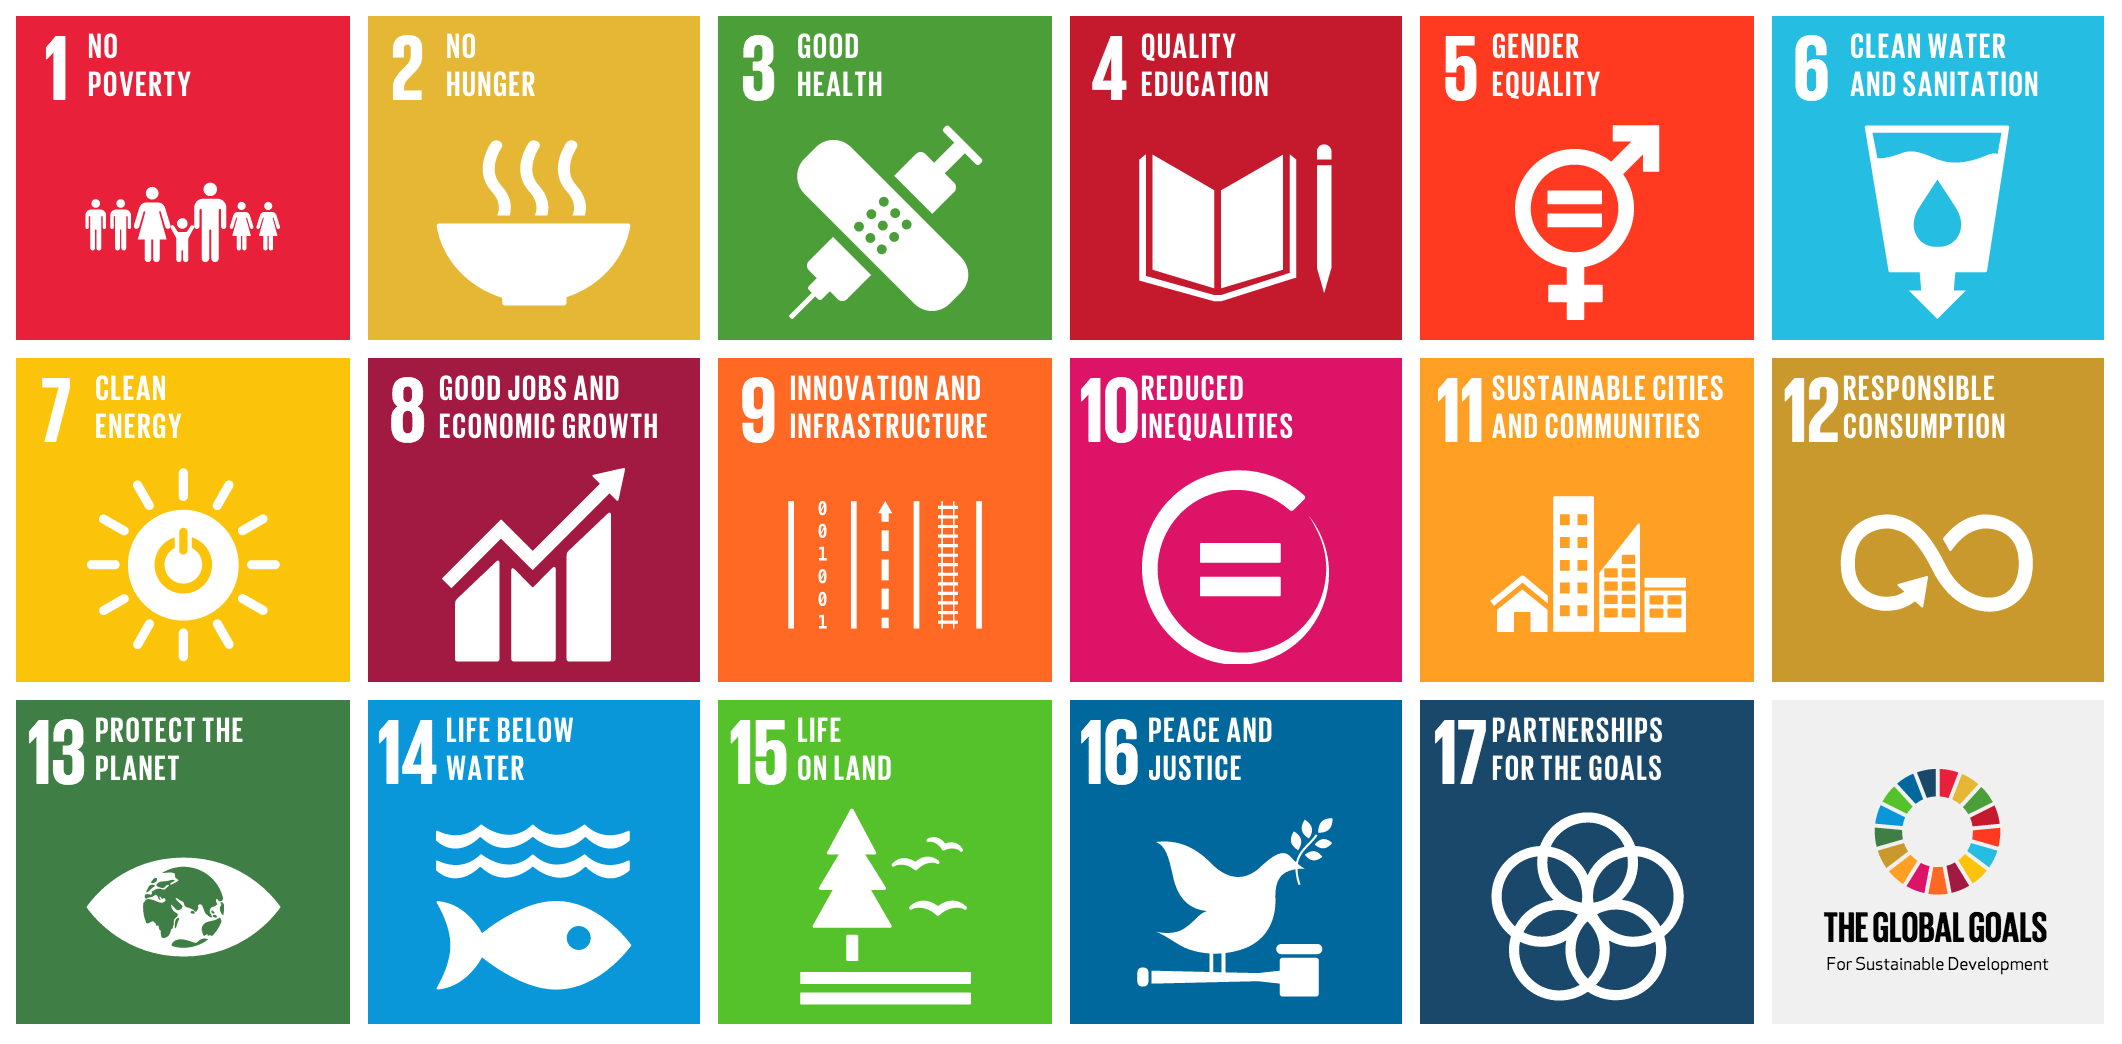 Global Goals for Sustainable Development